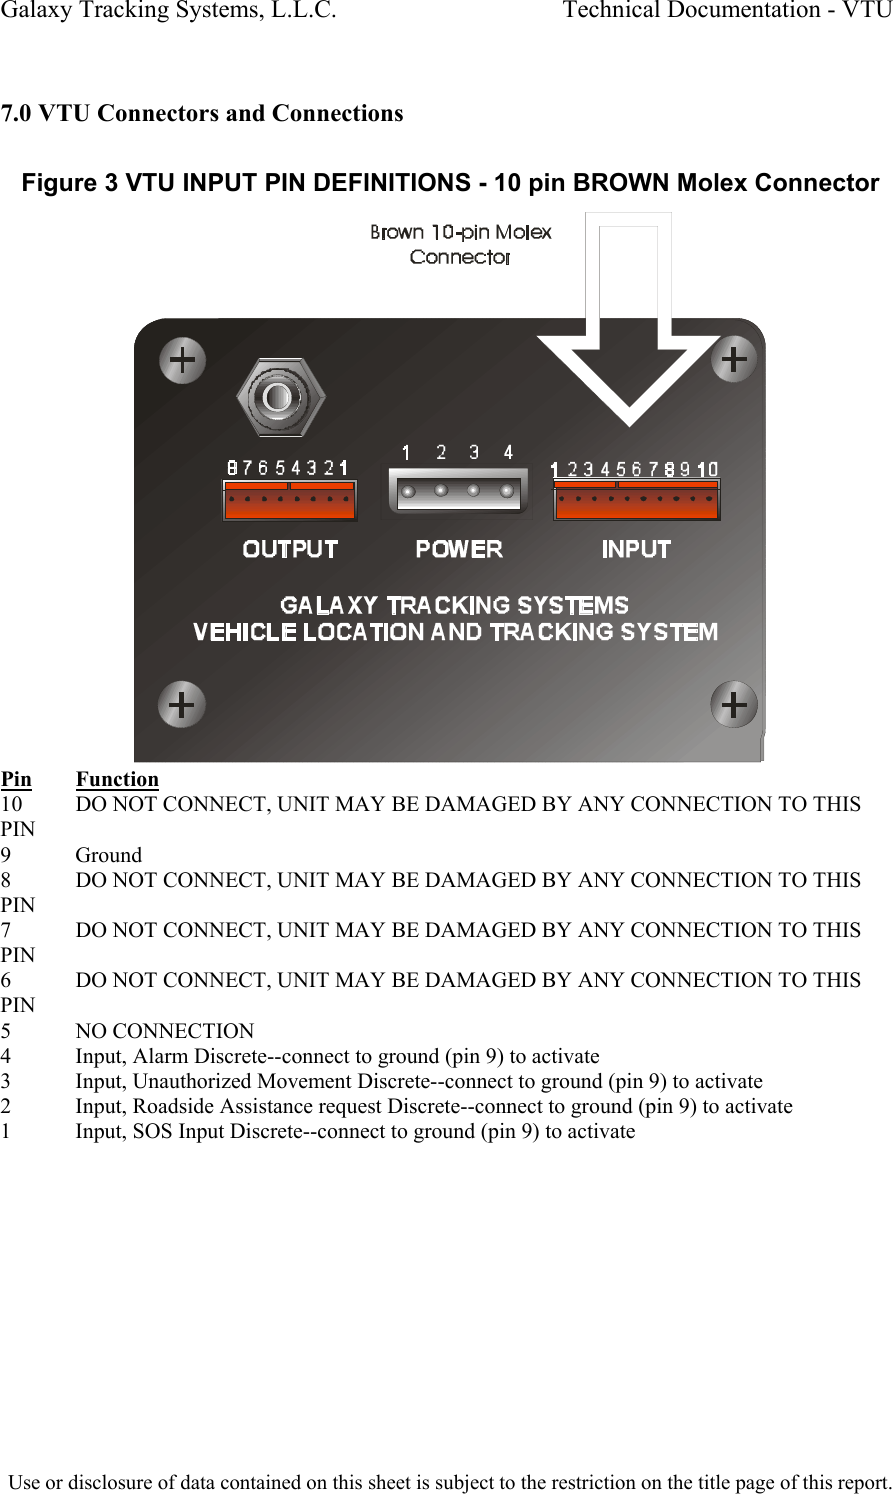 Galaxy Tracking Systems, L.L.C.                                    Technical Documentation - VTU   7.0 VTU Connectors and Connections  Figure 3 VTU INPUT PIN DEFINITIONS - 10 pin BROWN Molex Connector  Pin Function 10  DO NOT CONNECT, UNIT MAY BE DAMAGED BY ANY CONNECTION TO THIS PIN 9 Ground 8  DO NOT CONNECT, UNIT MAY BE DAMAGED BY ANY CONNECTION TO THIS PIN 7  DO NOT CONNECT, UNIT MAY BE DAMAGED BY ANY CONNECTION TO THIS PIN 6  DO NOT CONNECT, UNIT MAY BE DAMAGED BY ANY CONNECTION TO THIS PIN 5 NO CONNECTION 4  Input, Alarm Discrete--connect to ground (pin 9) to activate 3  Input, Unauthorized Movement Discrete--connect to ground (pin 9) to activate 2  Input, Roadside Assistance request Discrete--connect to ground (pin 9) to activate 1  Input, SOS Input Discrete--connect to ground (pin 9) to activate  Use or disclosure of data contained on this sheet is subject to the restriction on the title page of this report.  